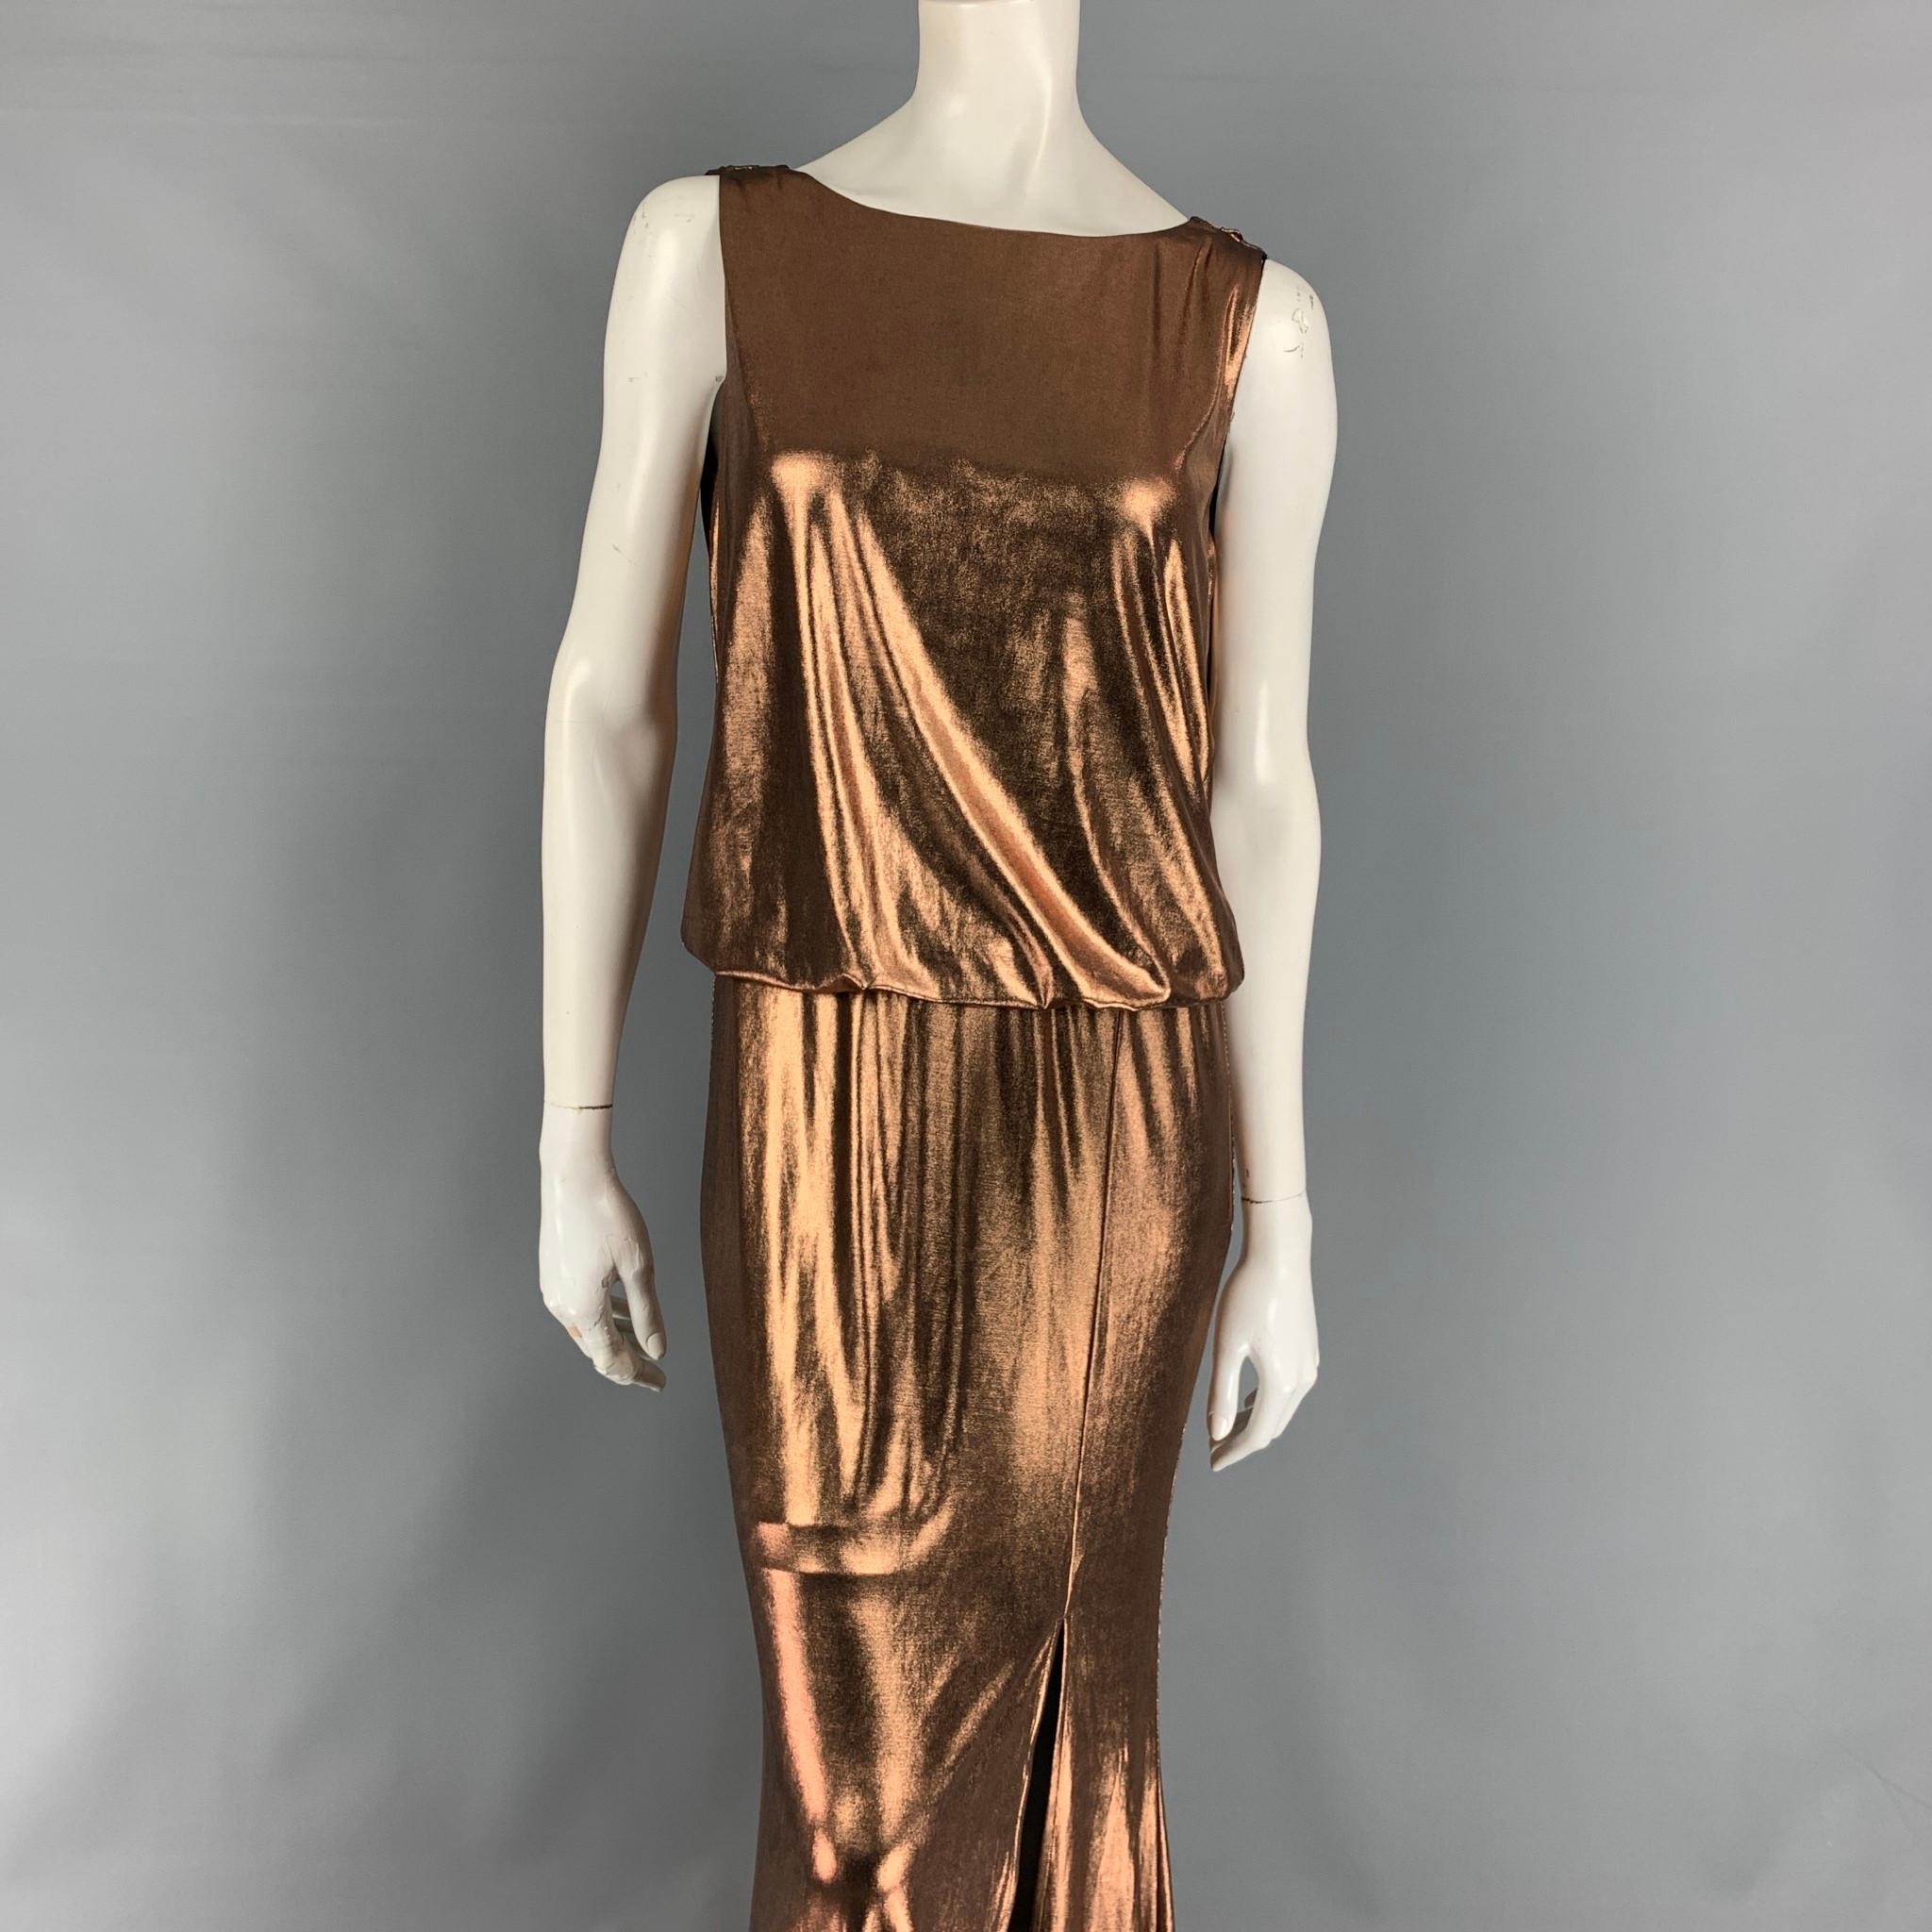 RACHEL ZOE gown comes in a copper metallic polyester / spandex featuring a slip liner, front slit detail, and a low back design. 

New With Tags. 
Marked: 2

Measurements:

Bust: 34 in.
Waist: 26 in.
Hip: 34 in.
Length: 62 in. 